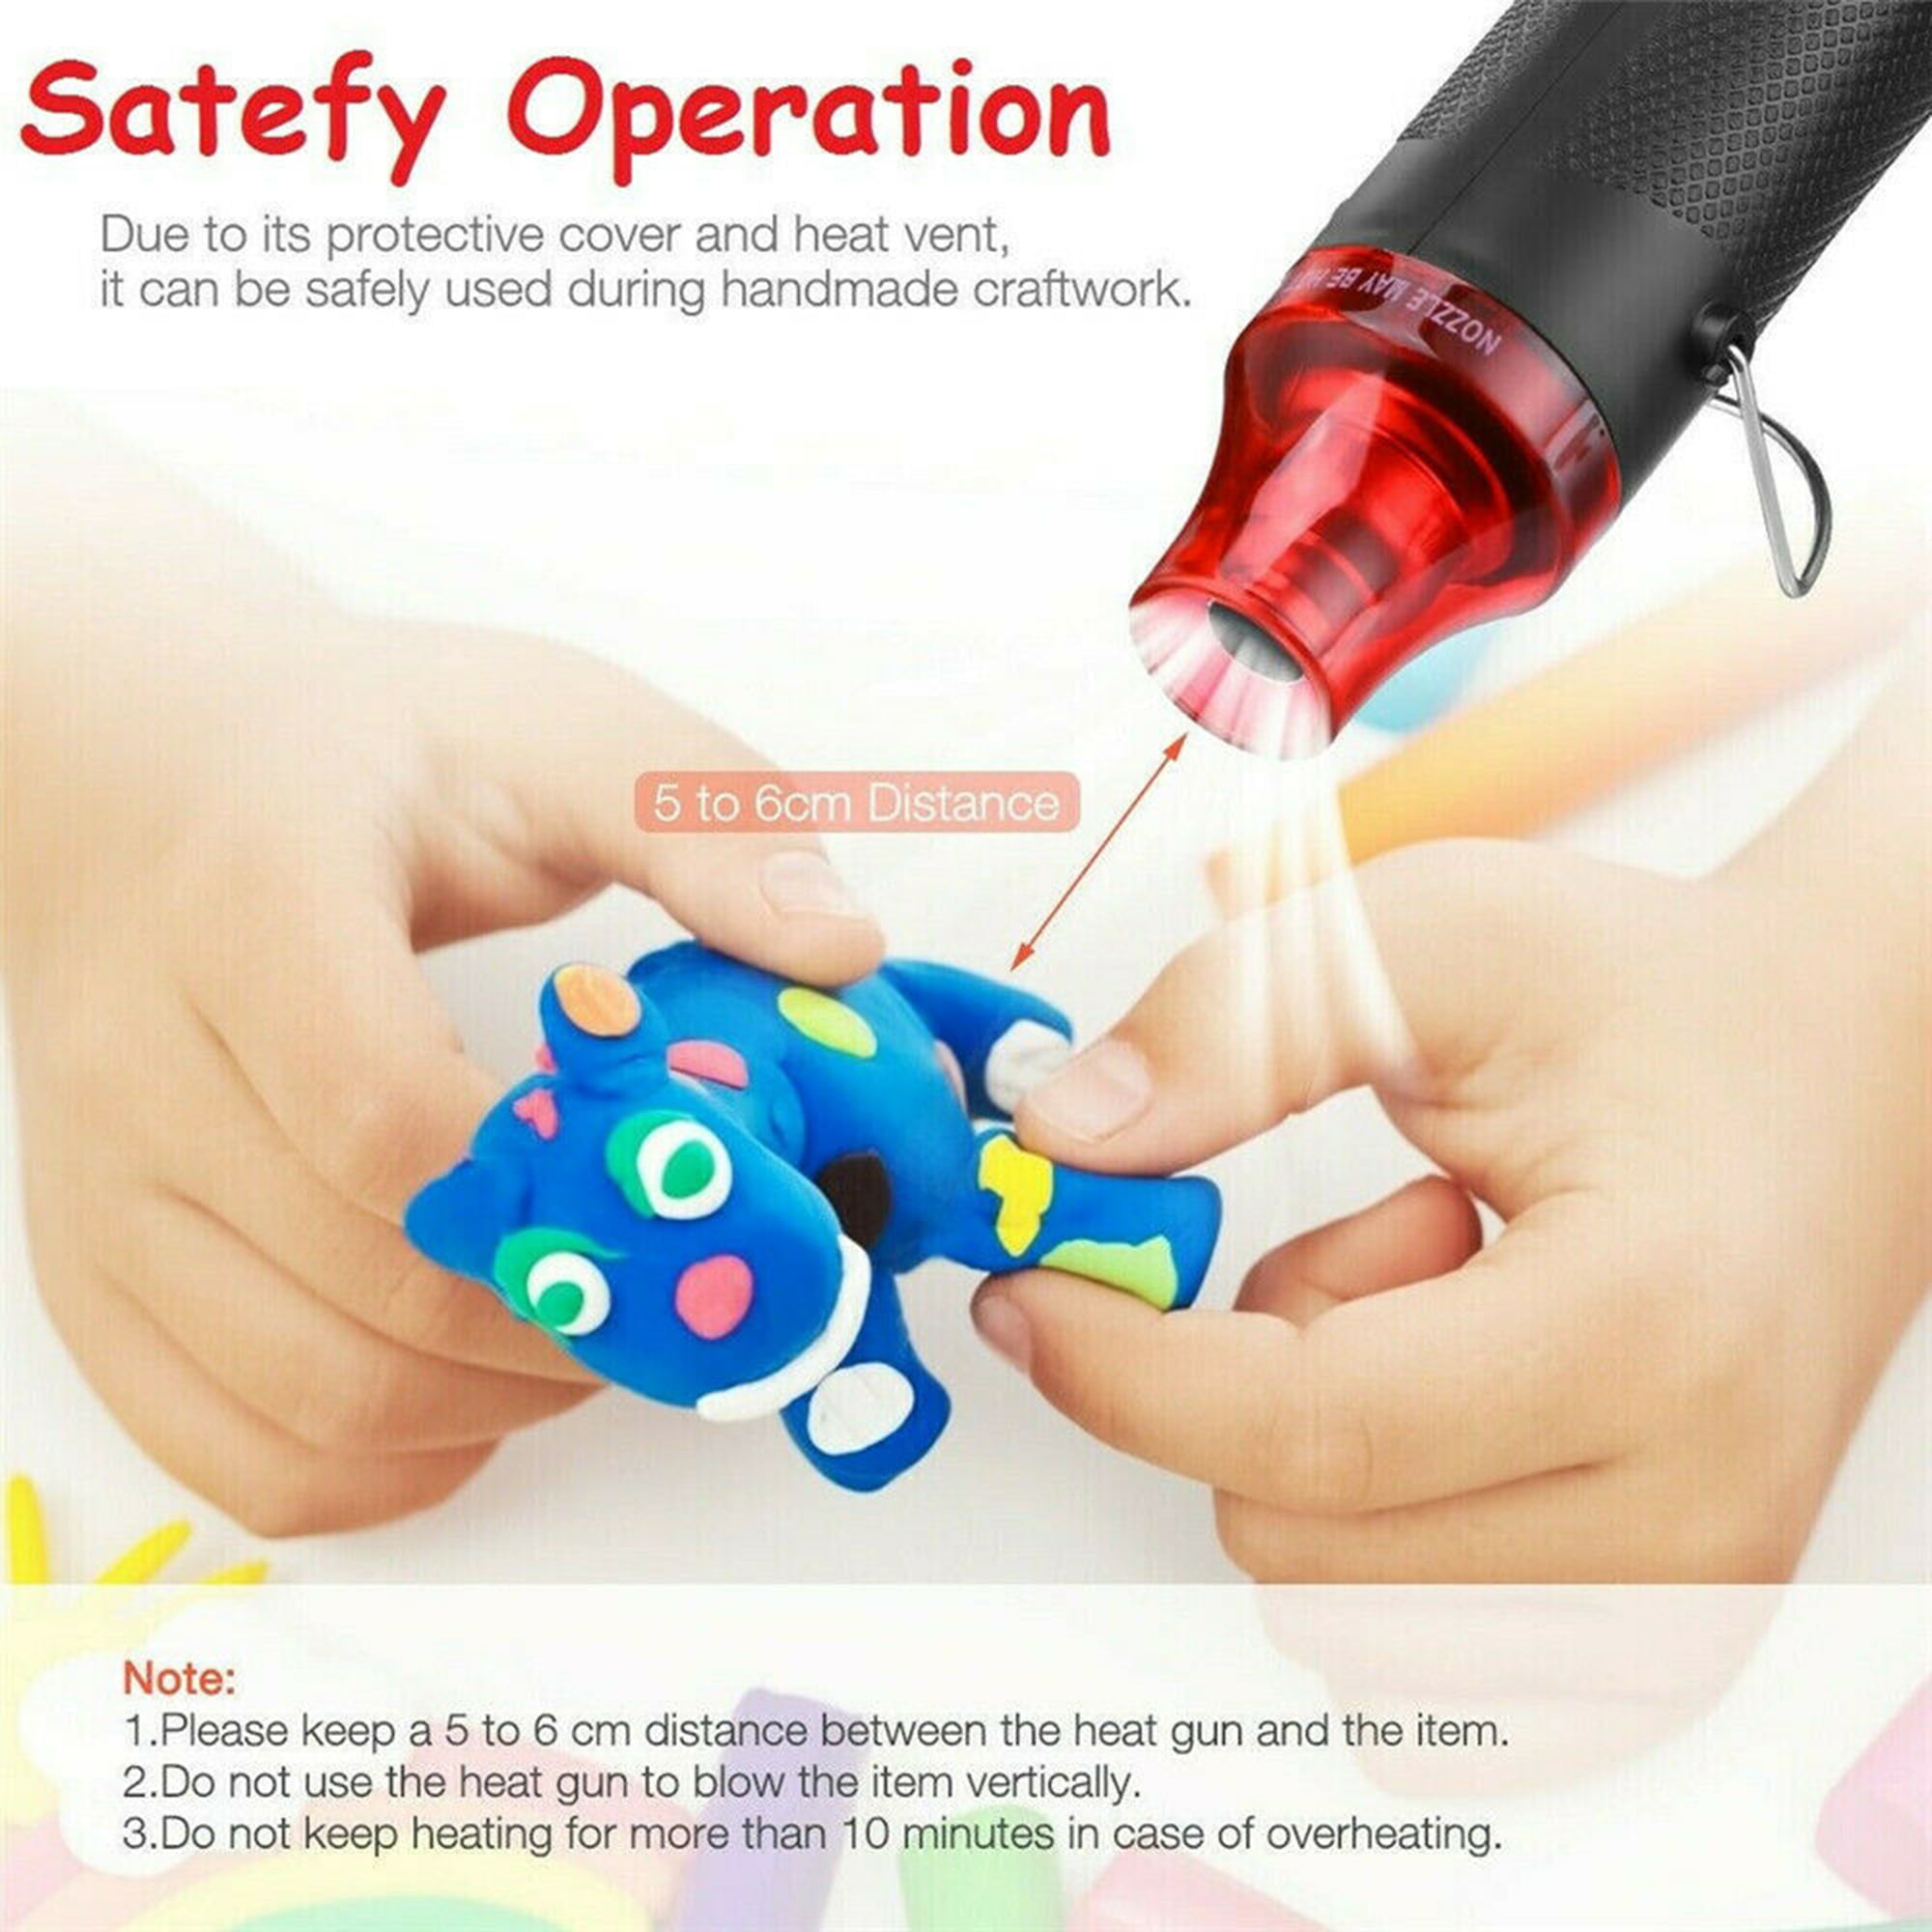 Mini Heat Gun,Temperature Heat Tool for Epoxy Resin,Tumbler Embossing for  Removing Epoxy Cup Painting Resin,Black